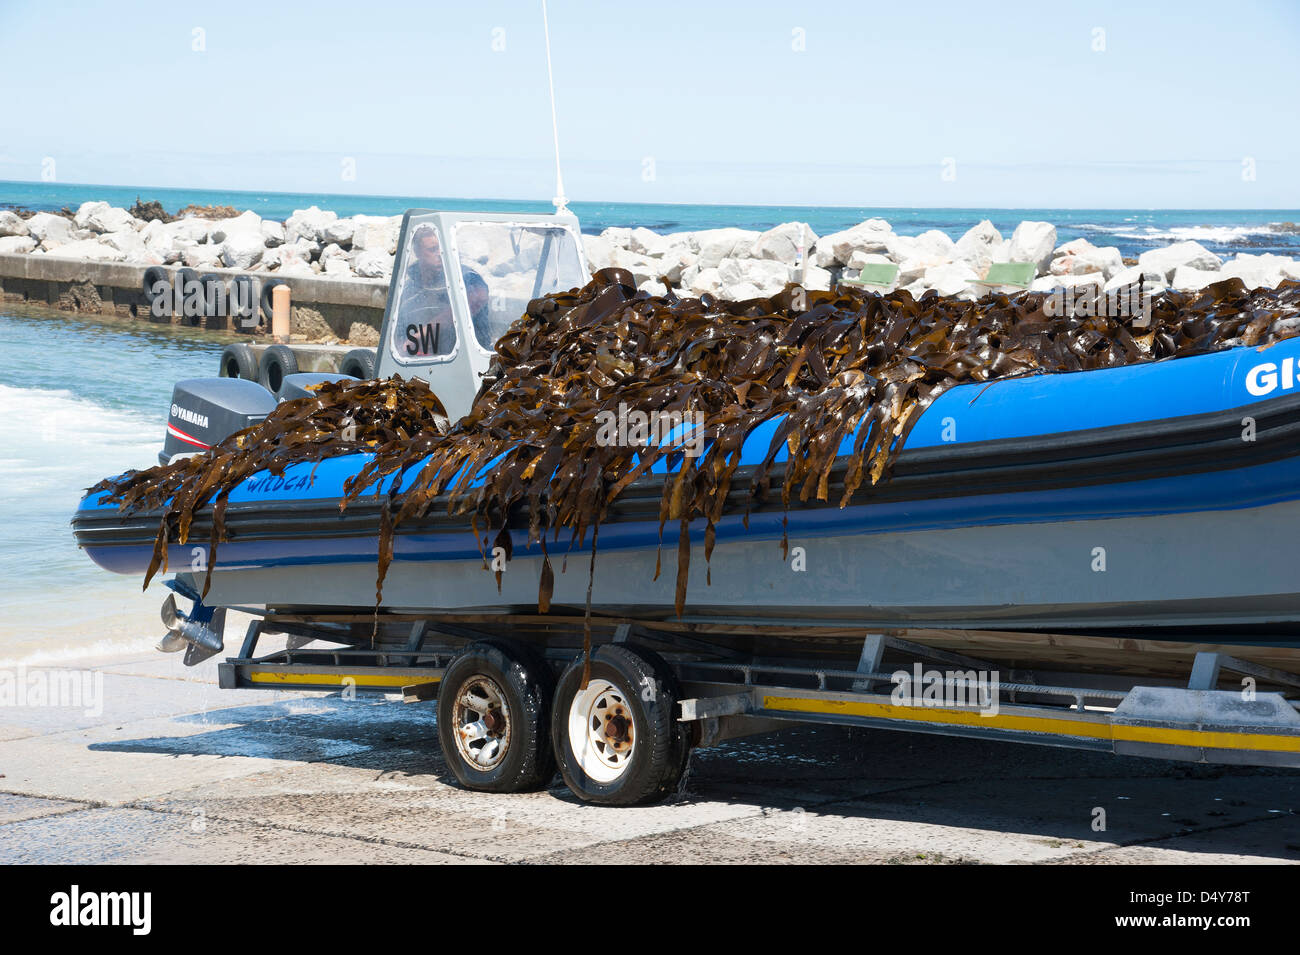 Seaweed industry. Bringing harvested seaweed ashore for the Taurus Chemical company at Kleinbaai Western Cape South Africa Stock Photo